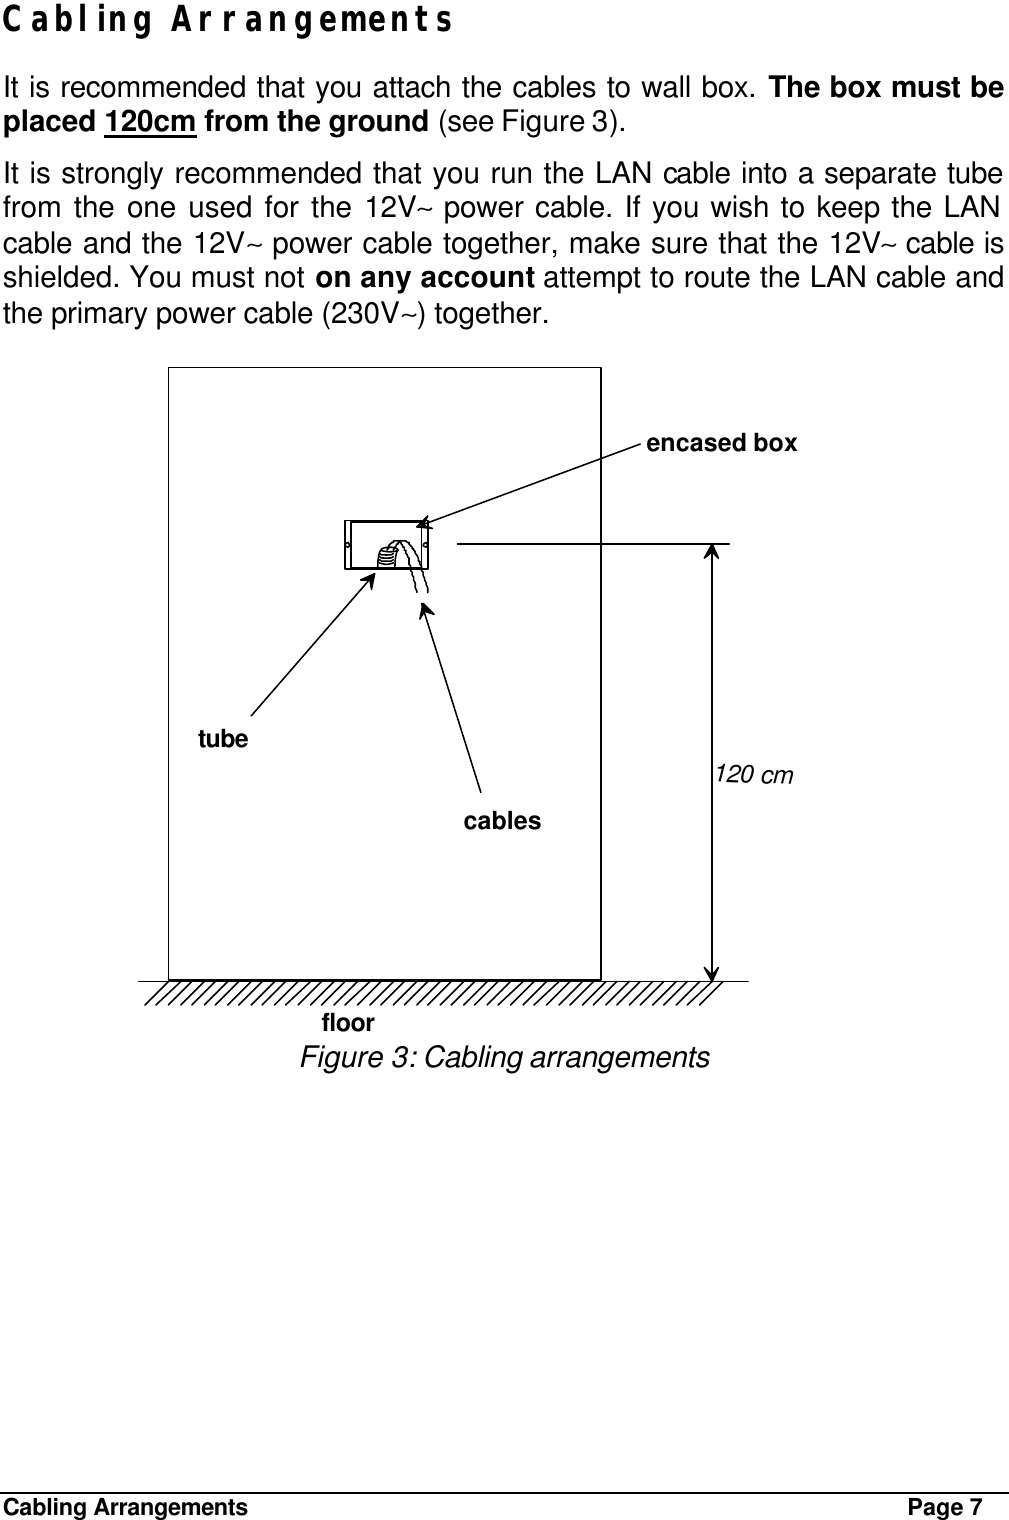 Cabling Arrangements Page 7 Cabling Arrangements It is recommended that you attach the cables to wall box. The box must be placed 120cm from the ground (see Figure 3). It is strongly recommended that you run the LAN cable into a separate tube from the one used for the 12V∼ power cable. If you wish to keep the LAN cable and the 12V∼ power cable together, make sure that the 12V∼ cable is shielded. You must not on any account attempt to route the LAN cable and the primary power cable (230V∼) together.  encased boxtubecablesfloor120 cm Figure 3: Cabling arrangements 